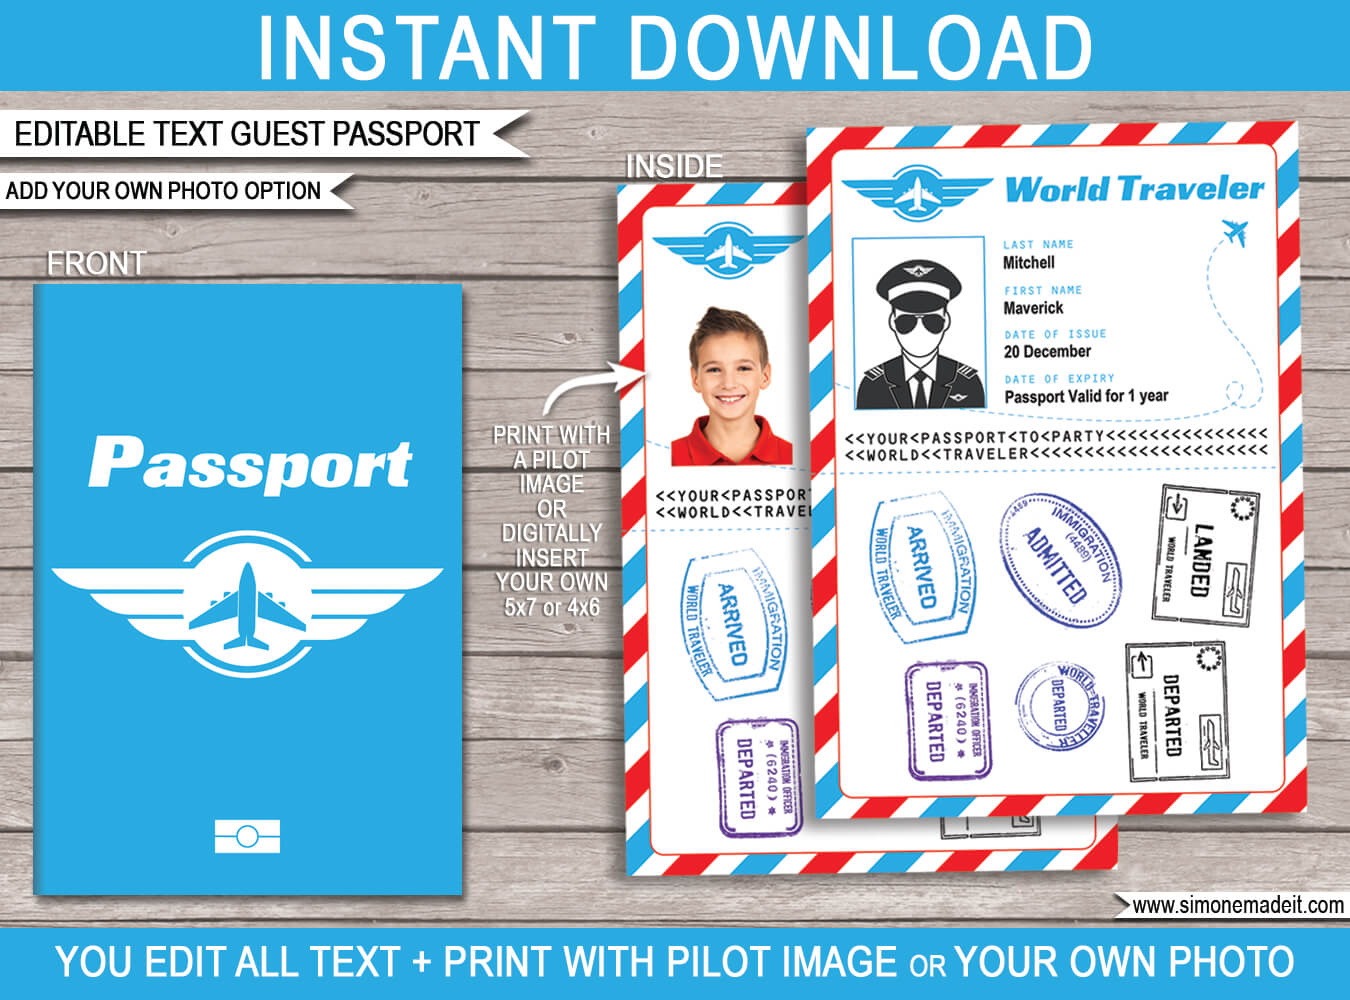 image-result-planes-party-airplane-party-grad-parties-custom-design